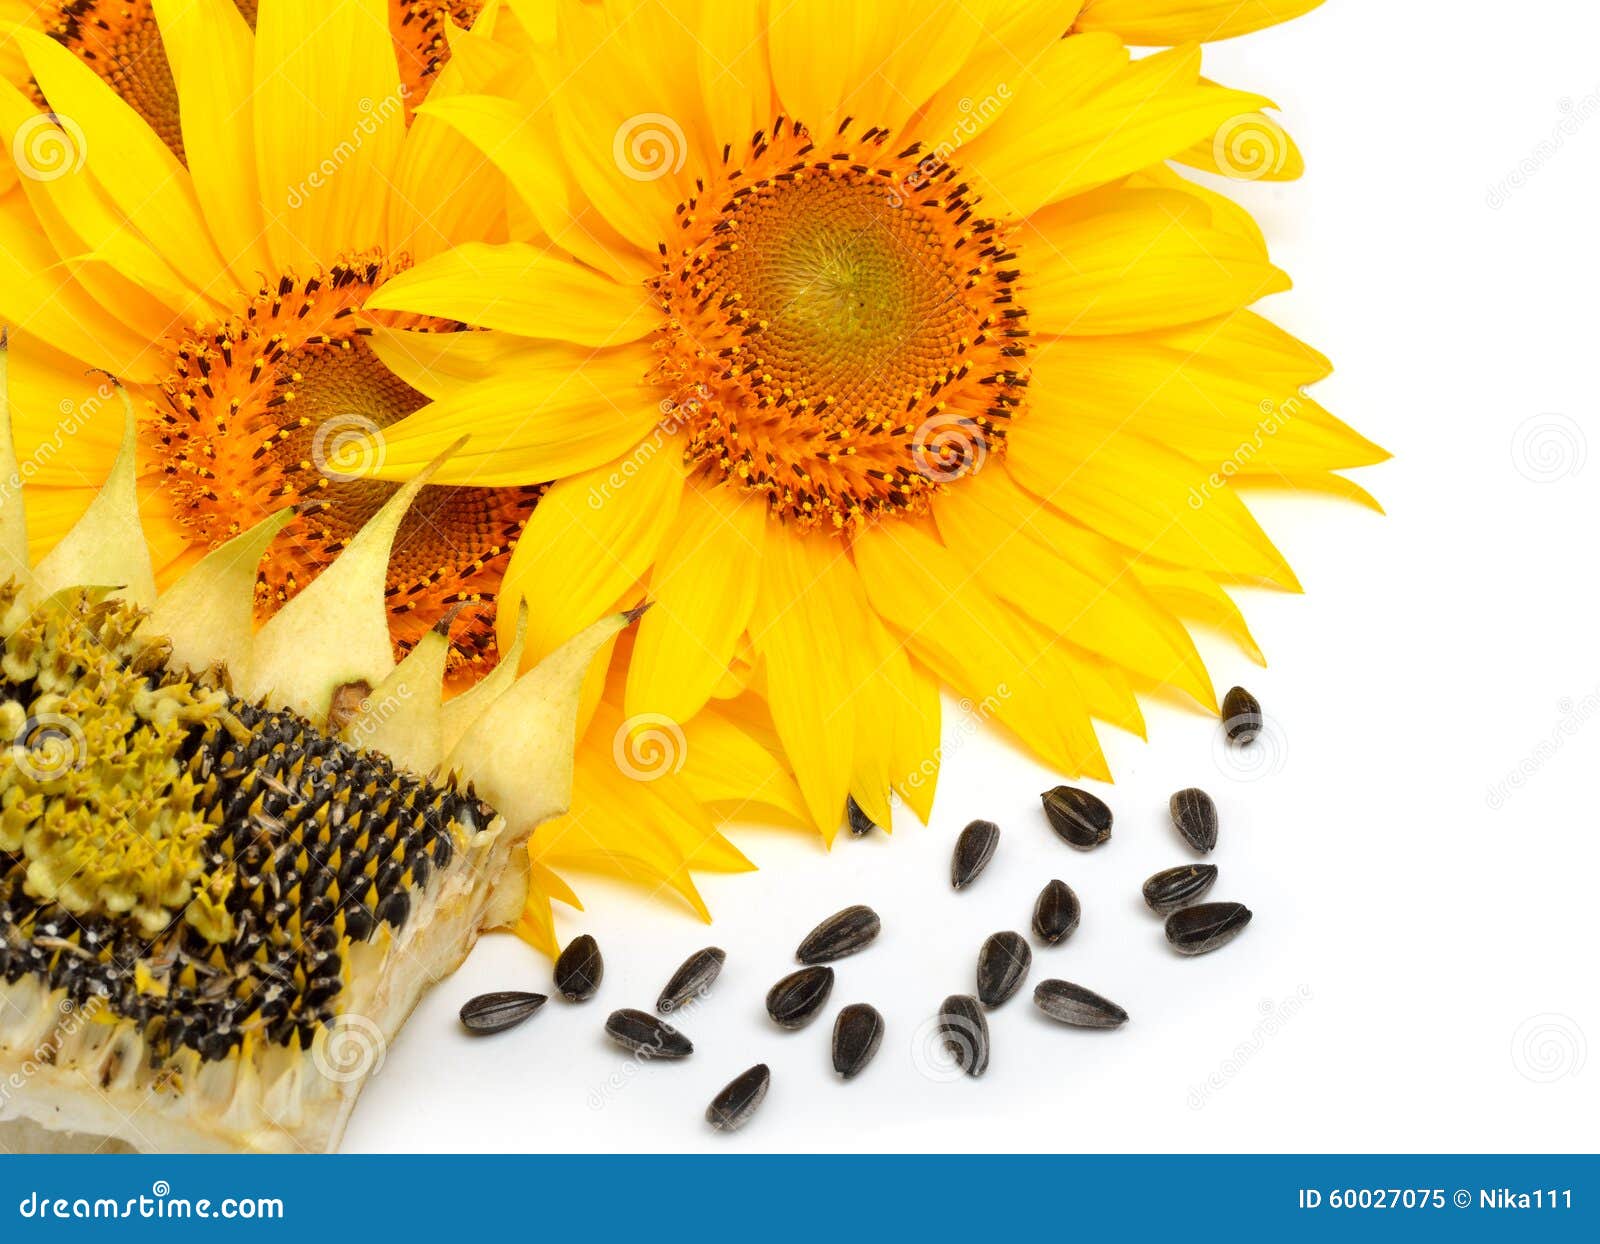 Sunflowers and Sunflower Seeds Isolated on White Background Stock Image ...